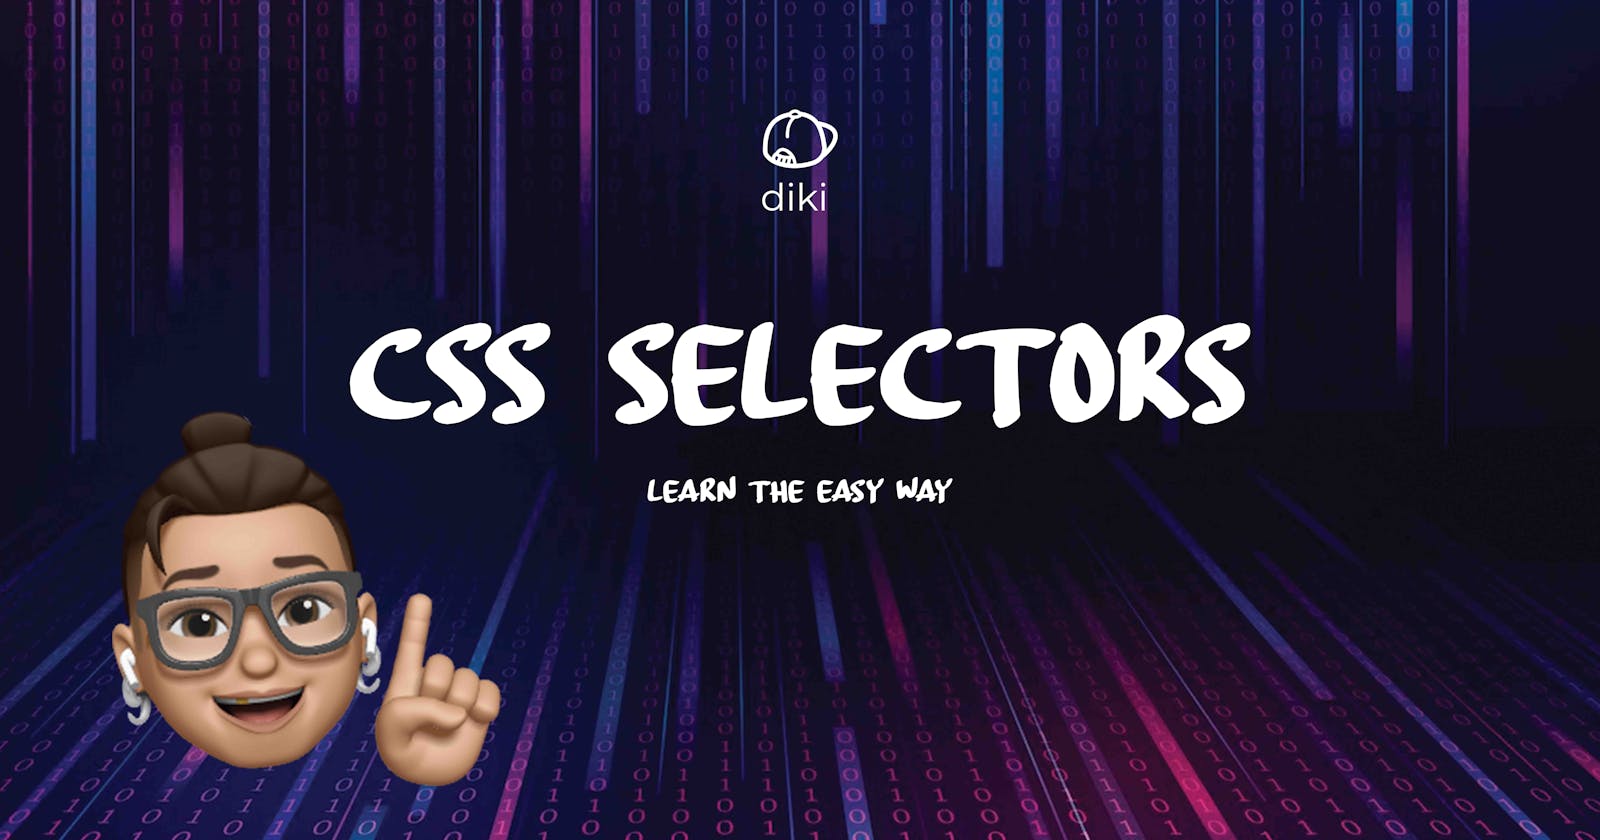 A Practical Guide to Mastering CSS Selectors